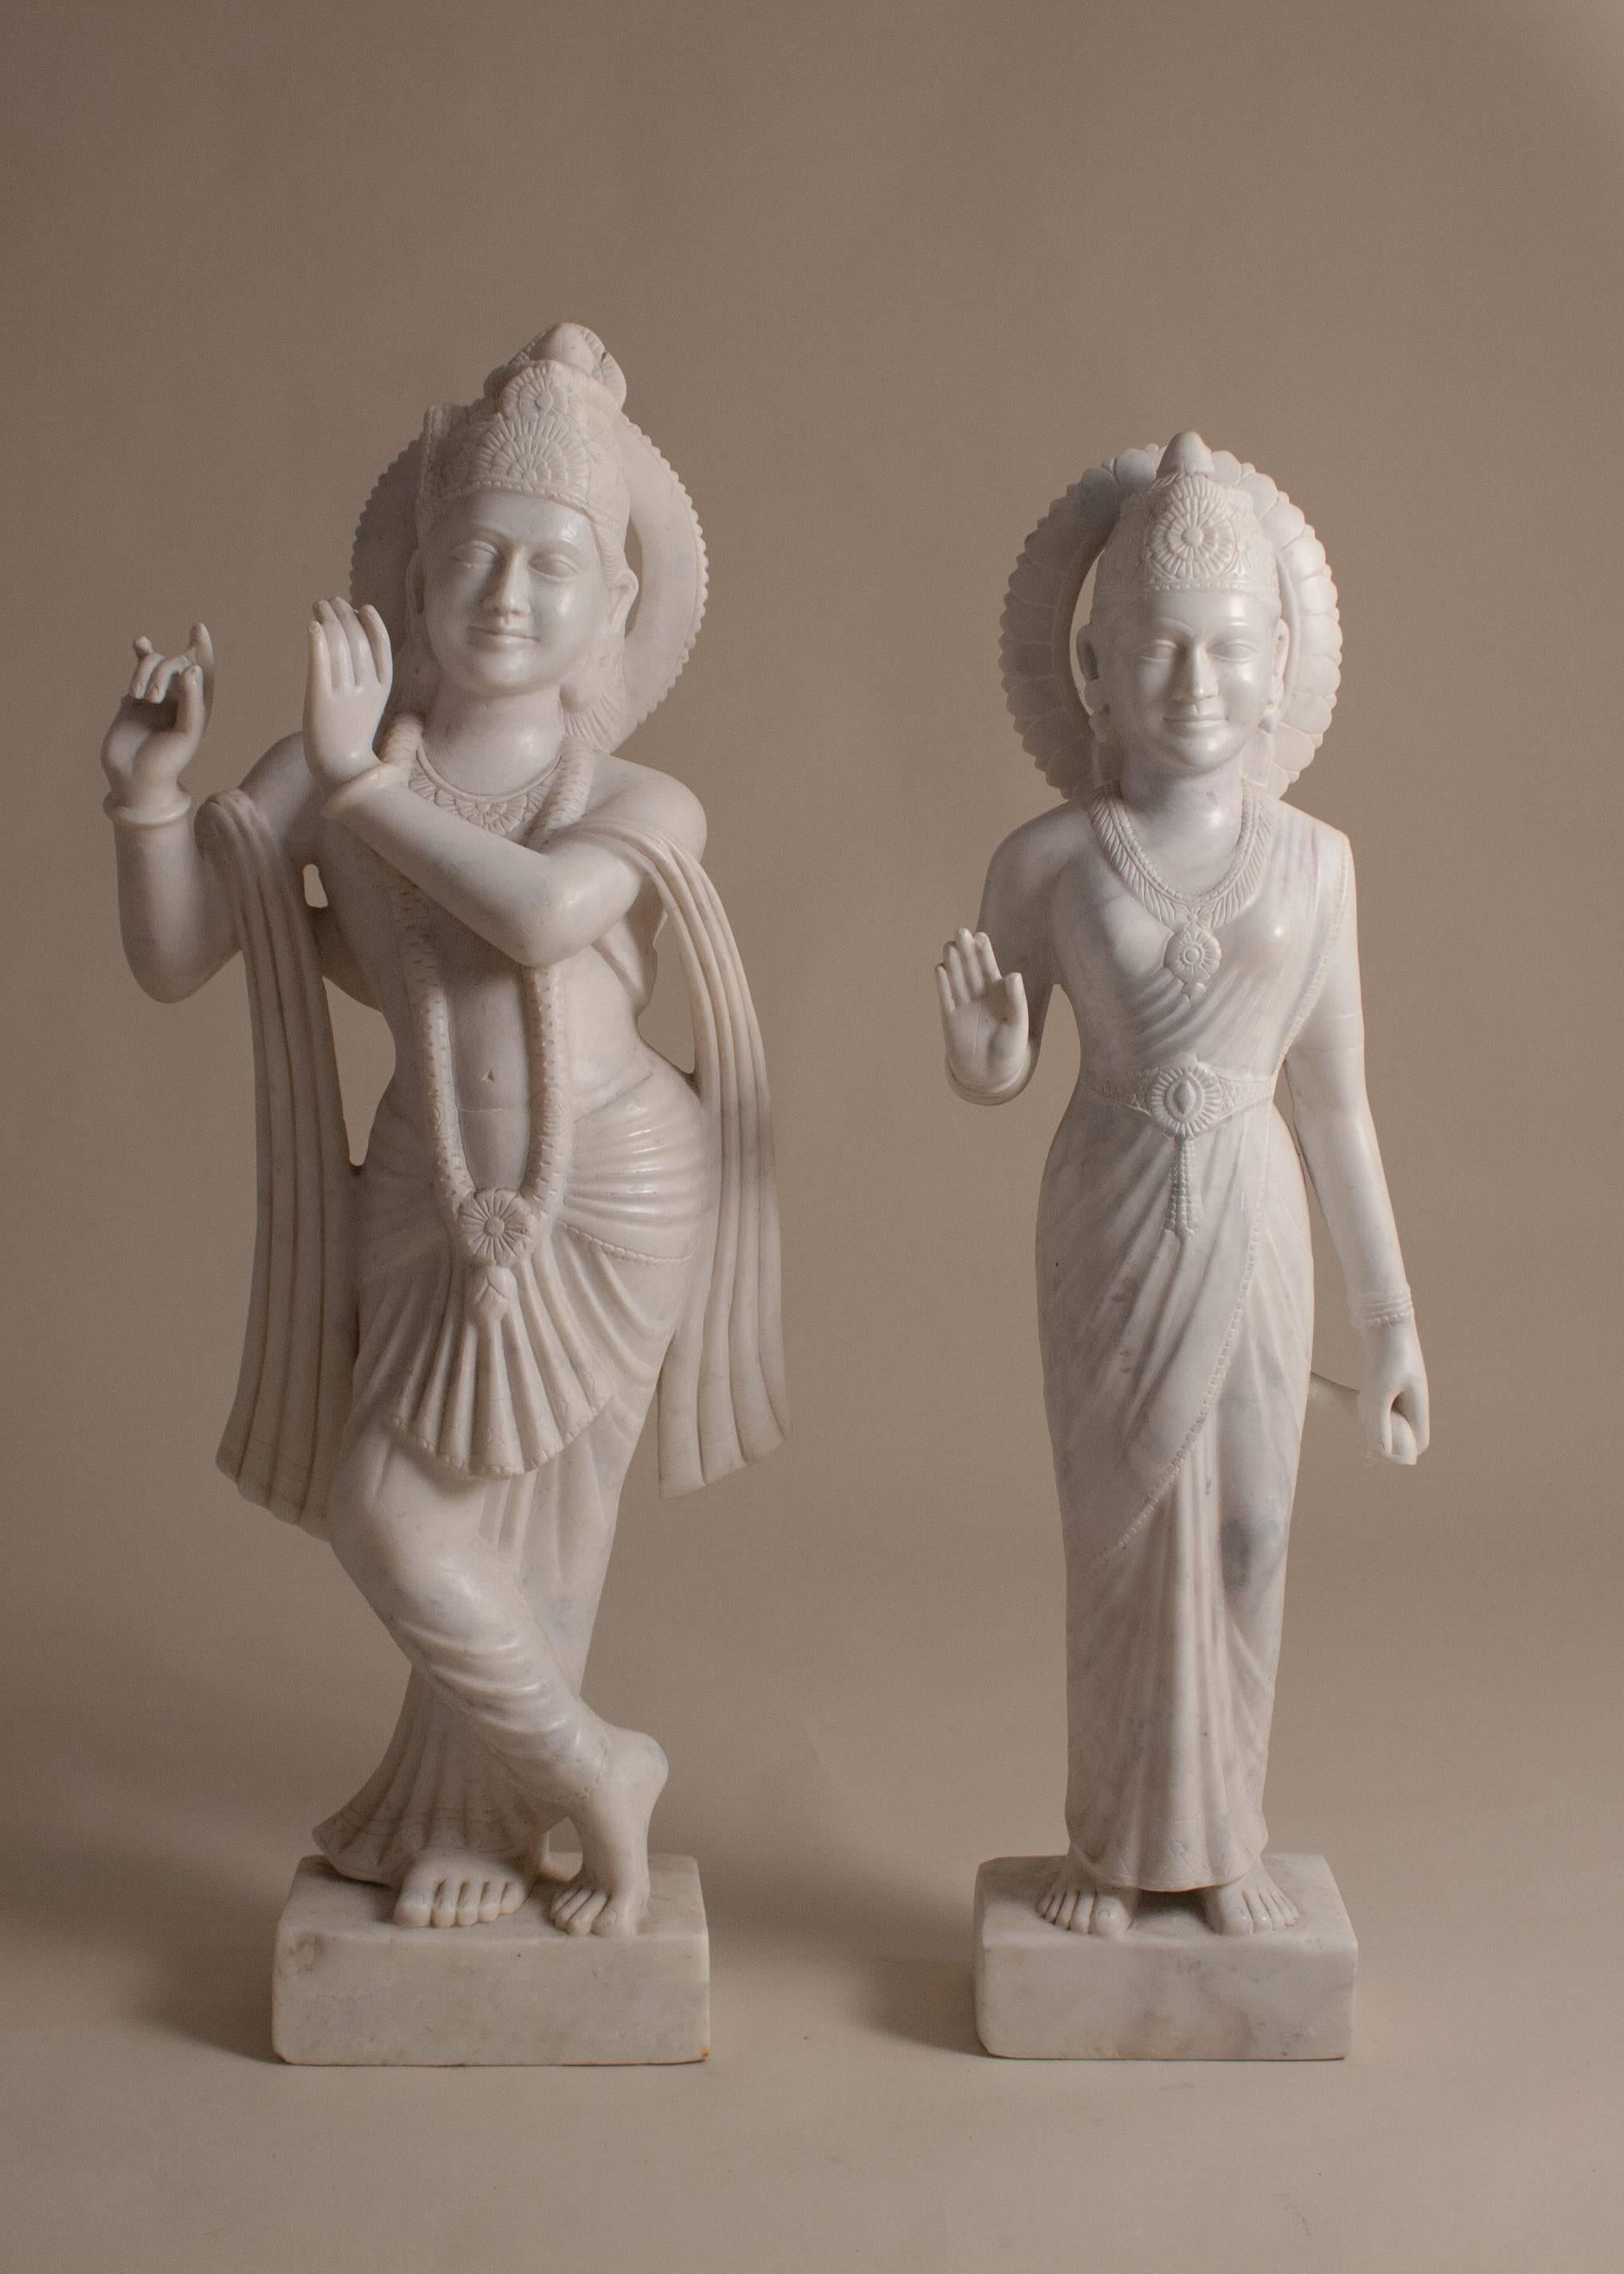 Hand carved from white marble, Supreme Goddess Radha enchants Krishna as he plays his flute. Standing at approximately three feet tall, these eternal lovers will grace any landscape or interior space that they inhabit. Circa 1970. 